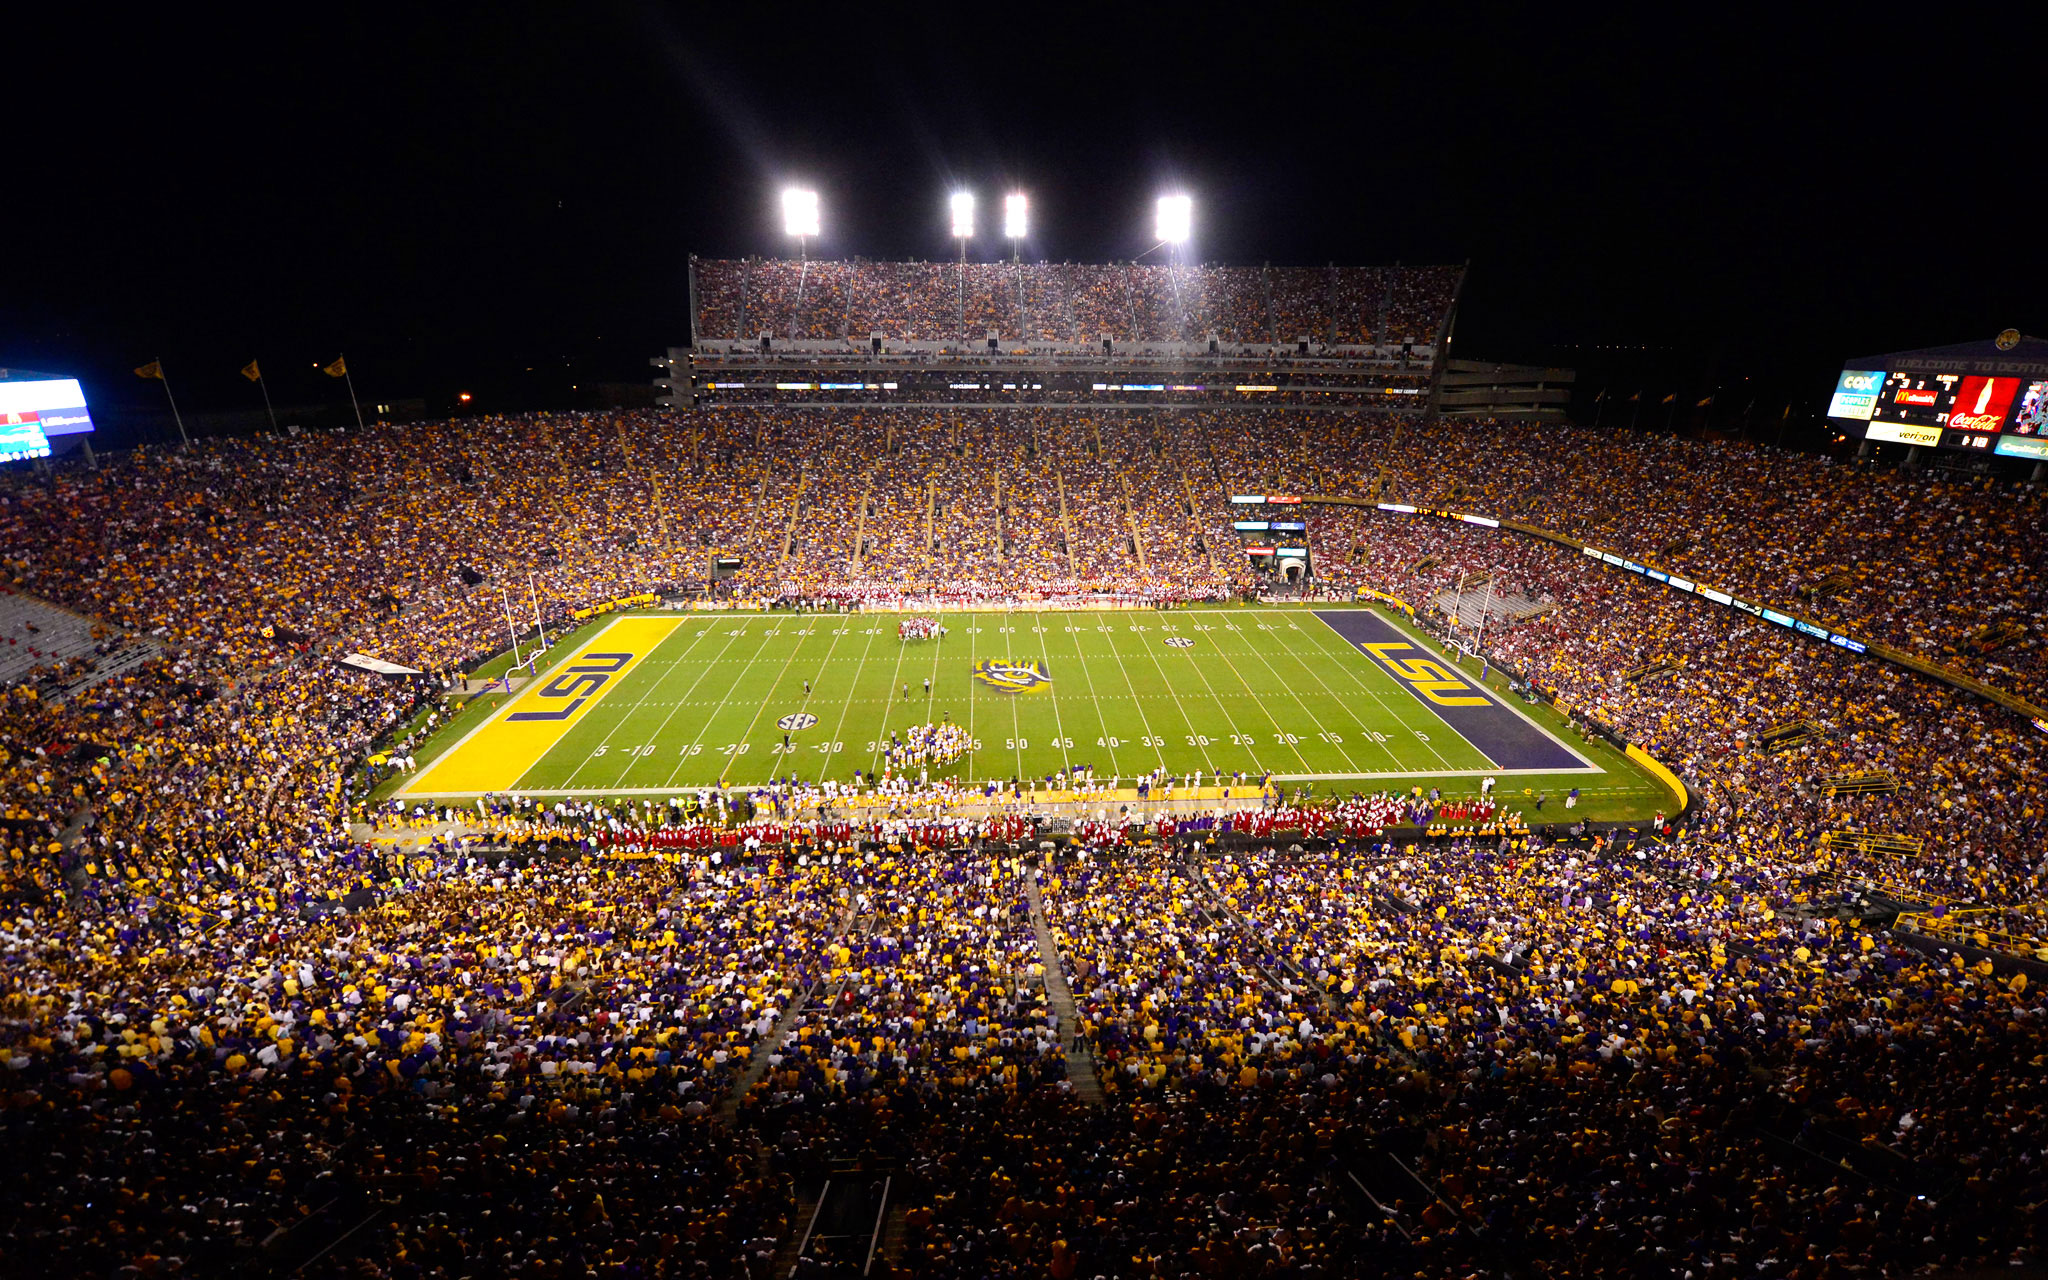 Showing Gallery For Lsu Football Stadium At Night